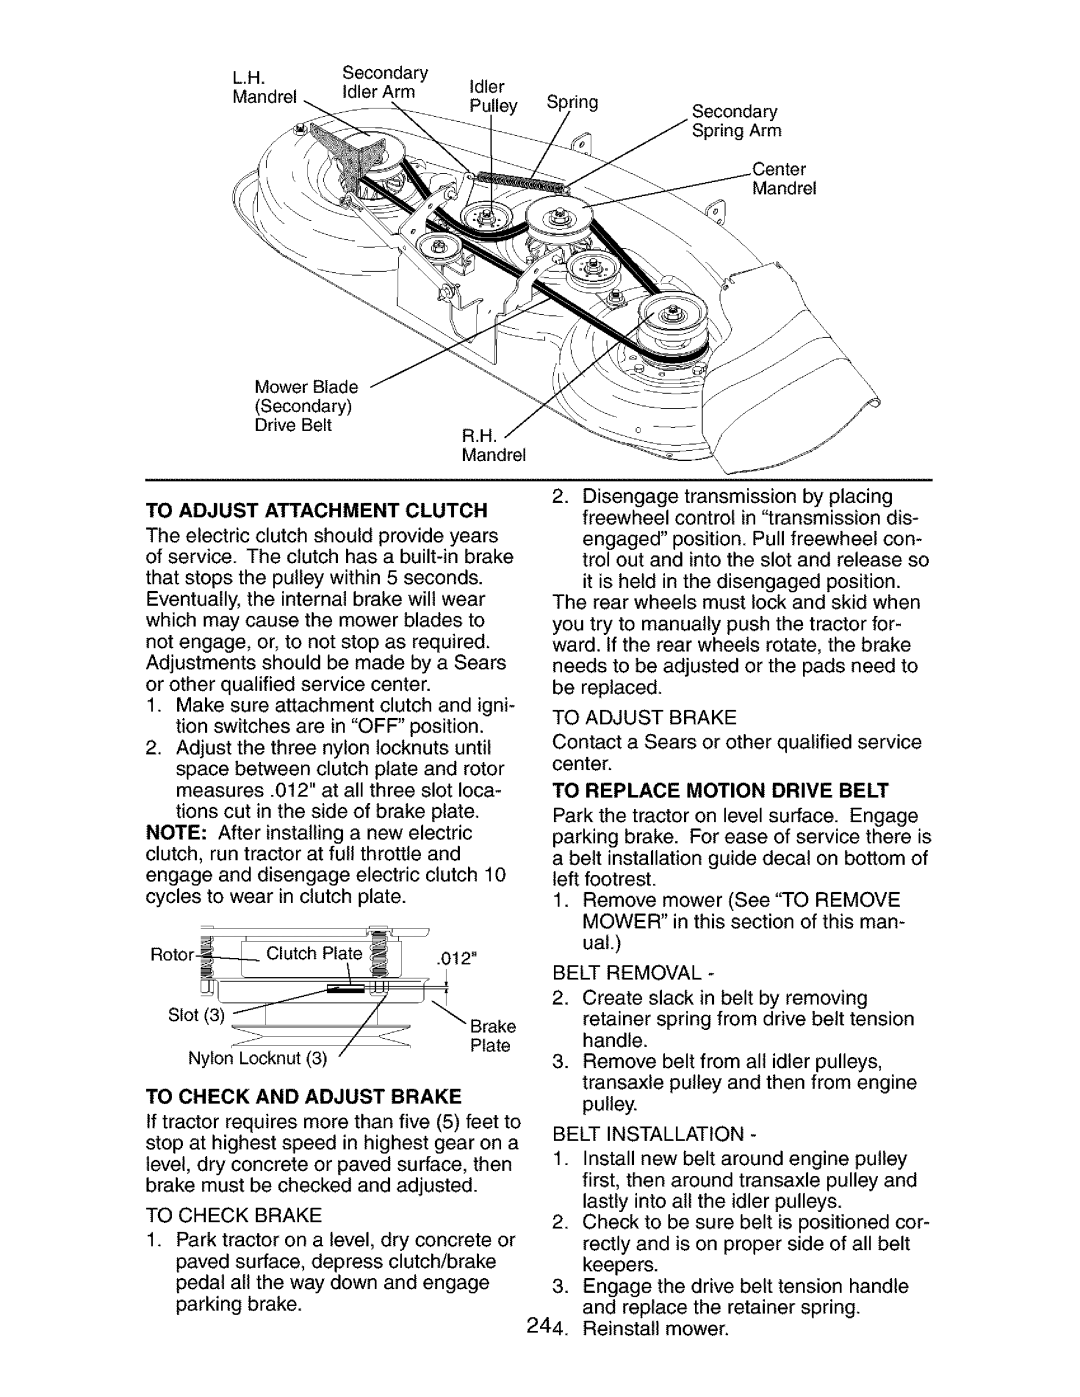 Craftsman 917.275283 owner manual To Adjust Attachment Clutch, To Check And Adjust Brake, To Replace Motion Drive Belt 